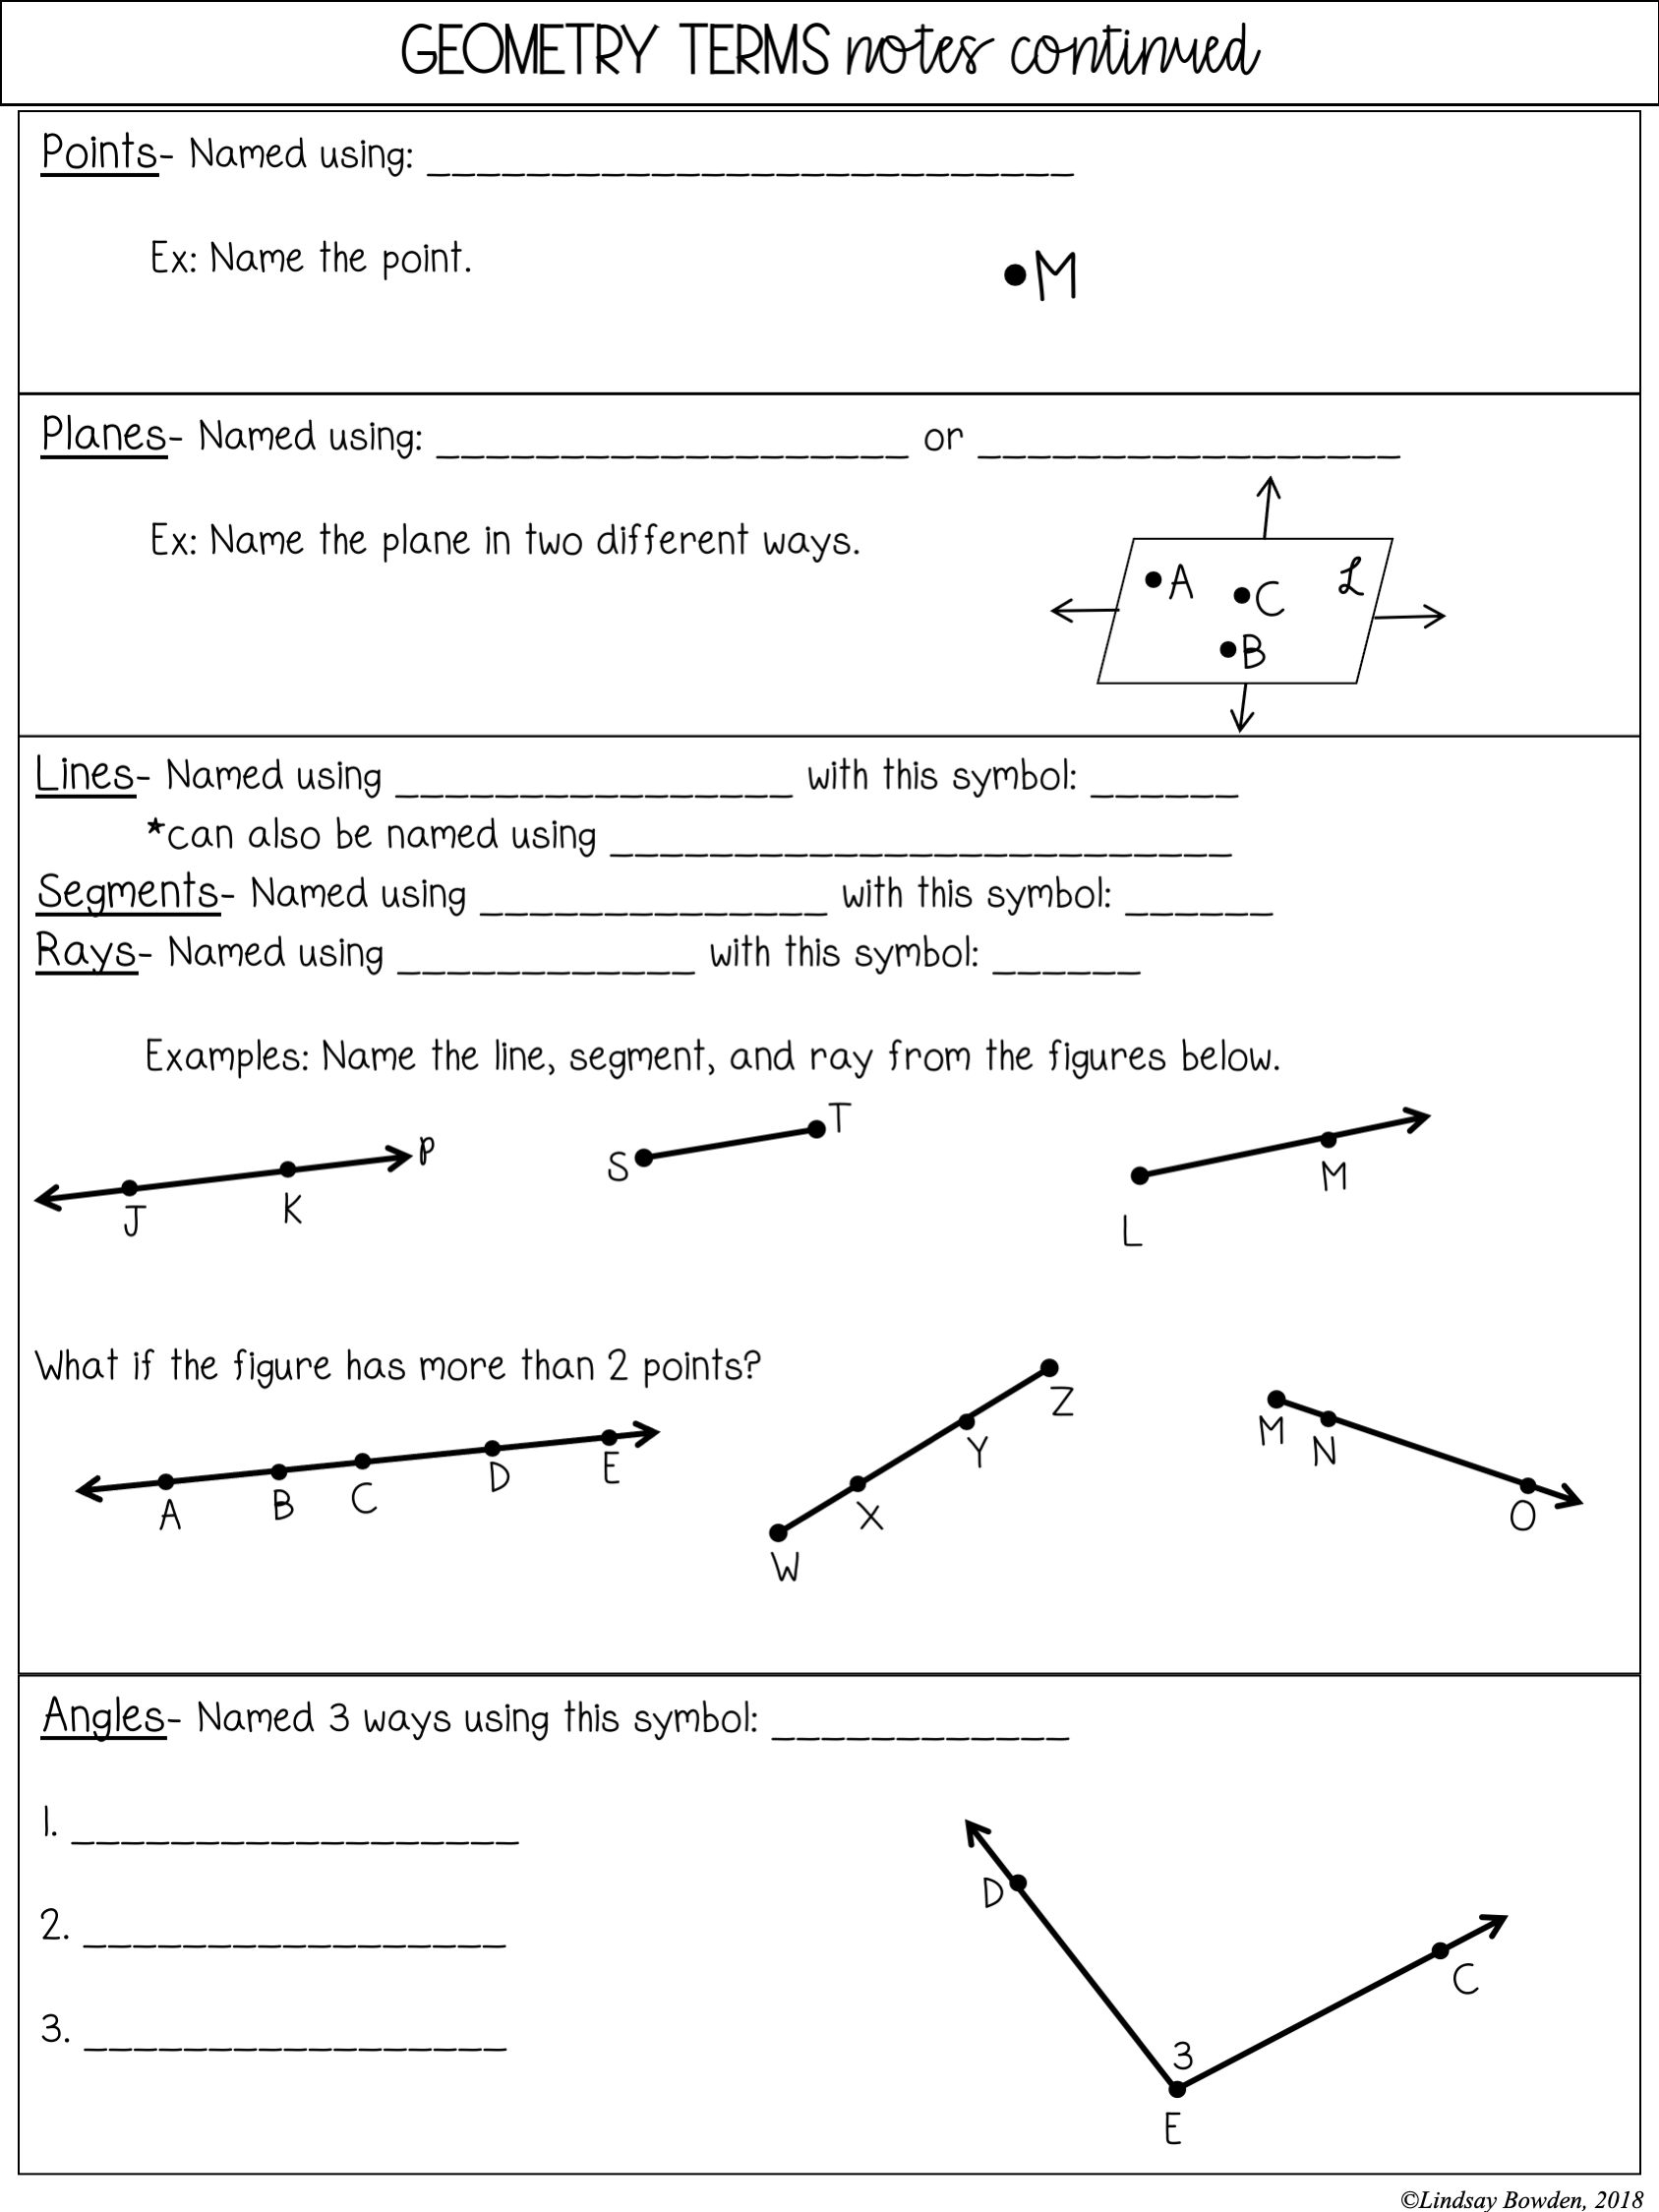 geometry-terms-notes-and-worksheets-lindsay-bowden